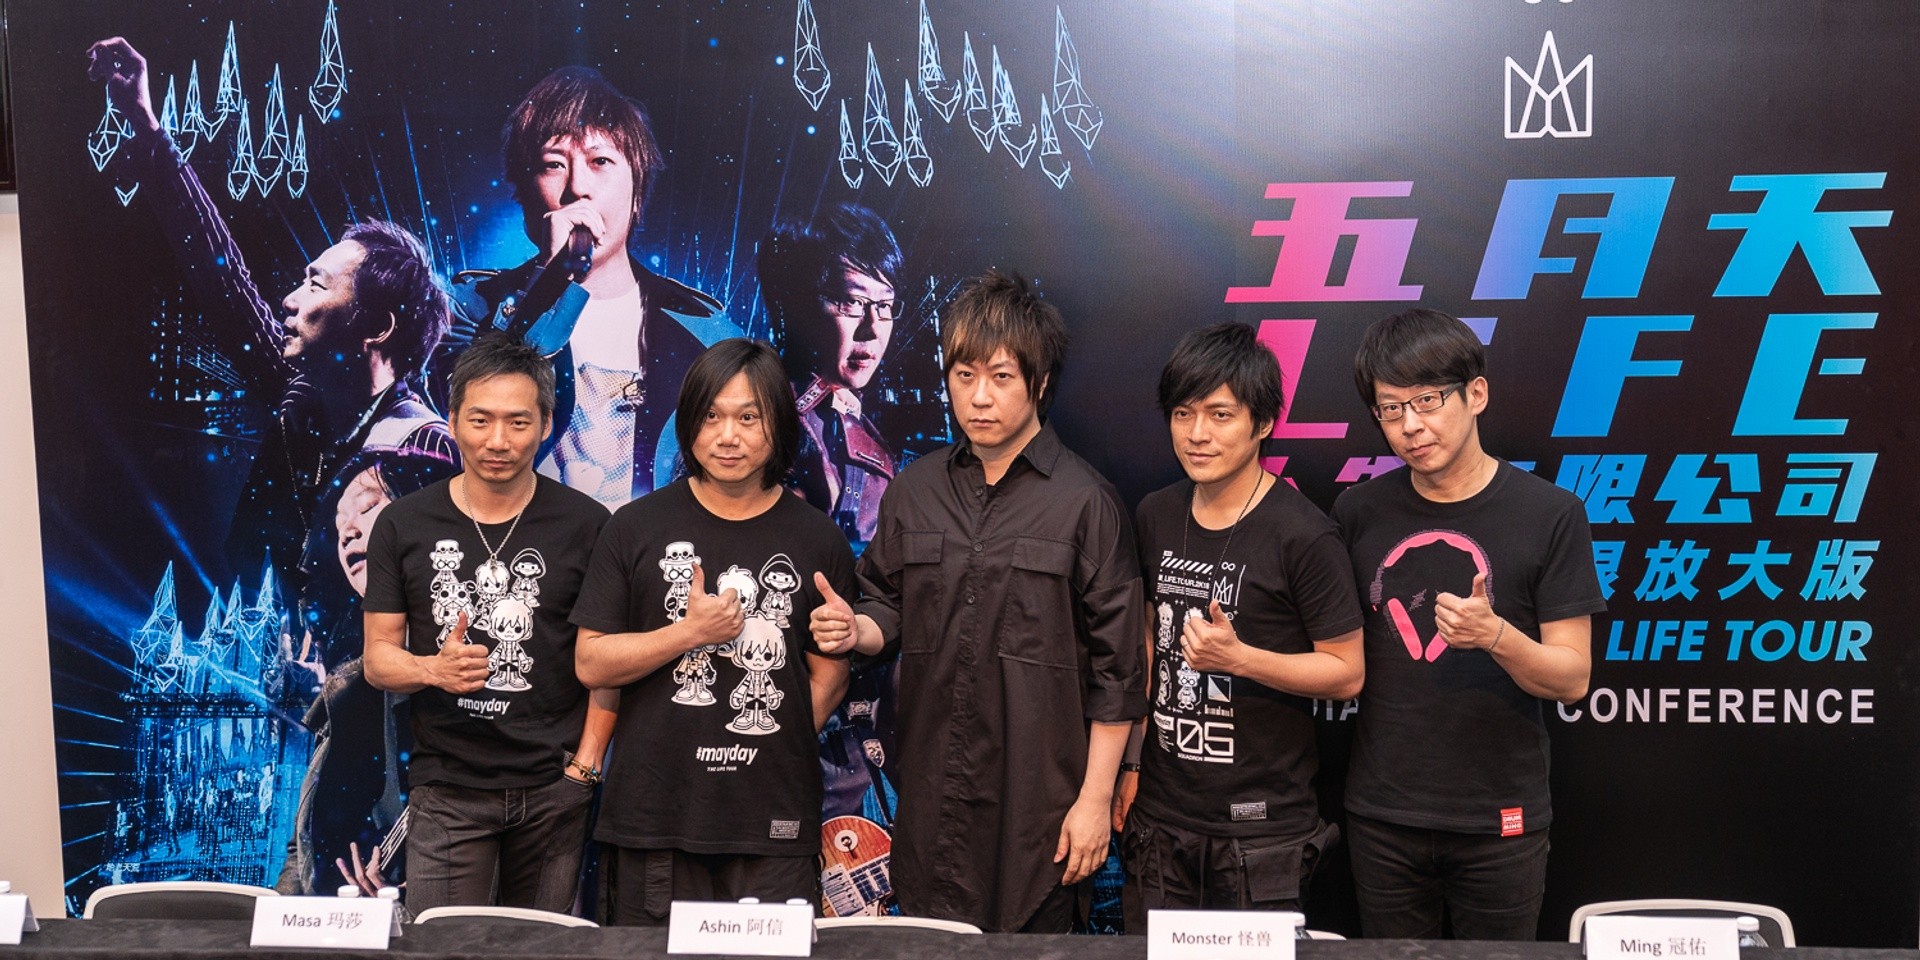 5 things we learnt from Mayday at their Singapore press conference